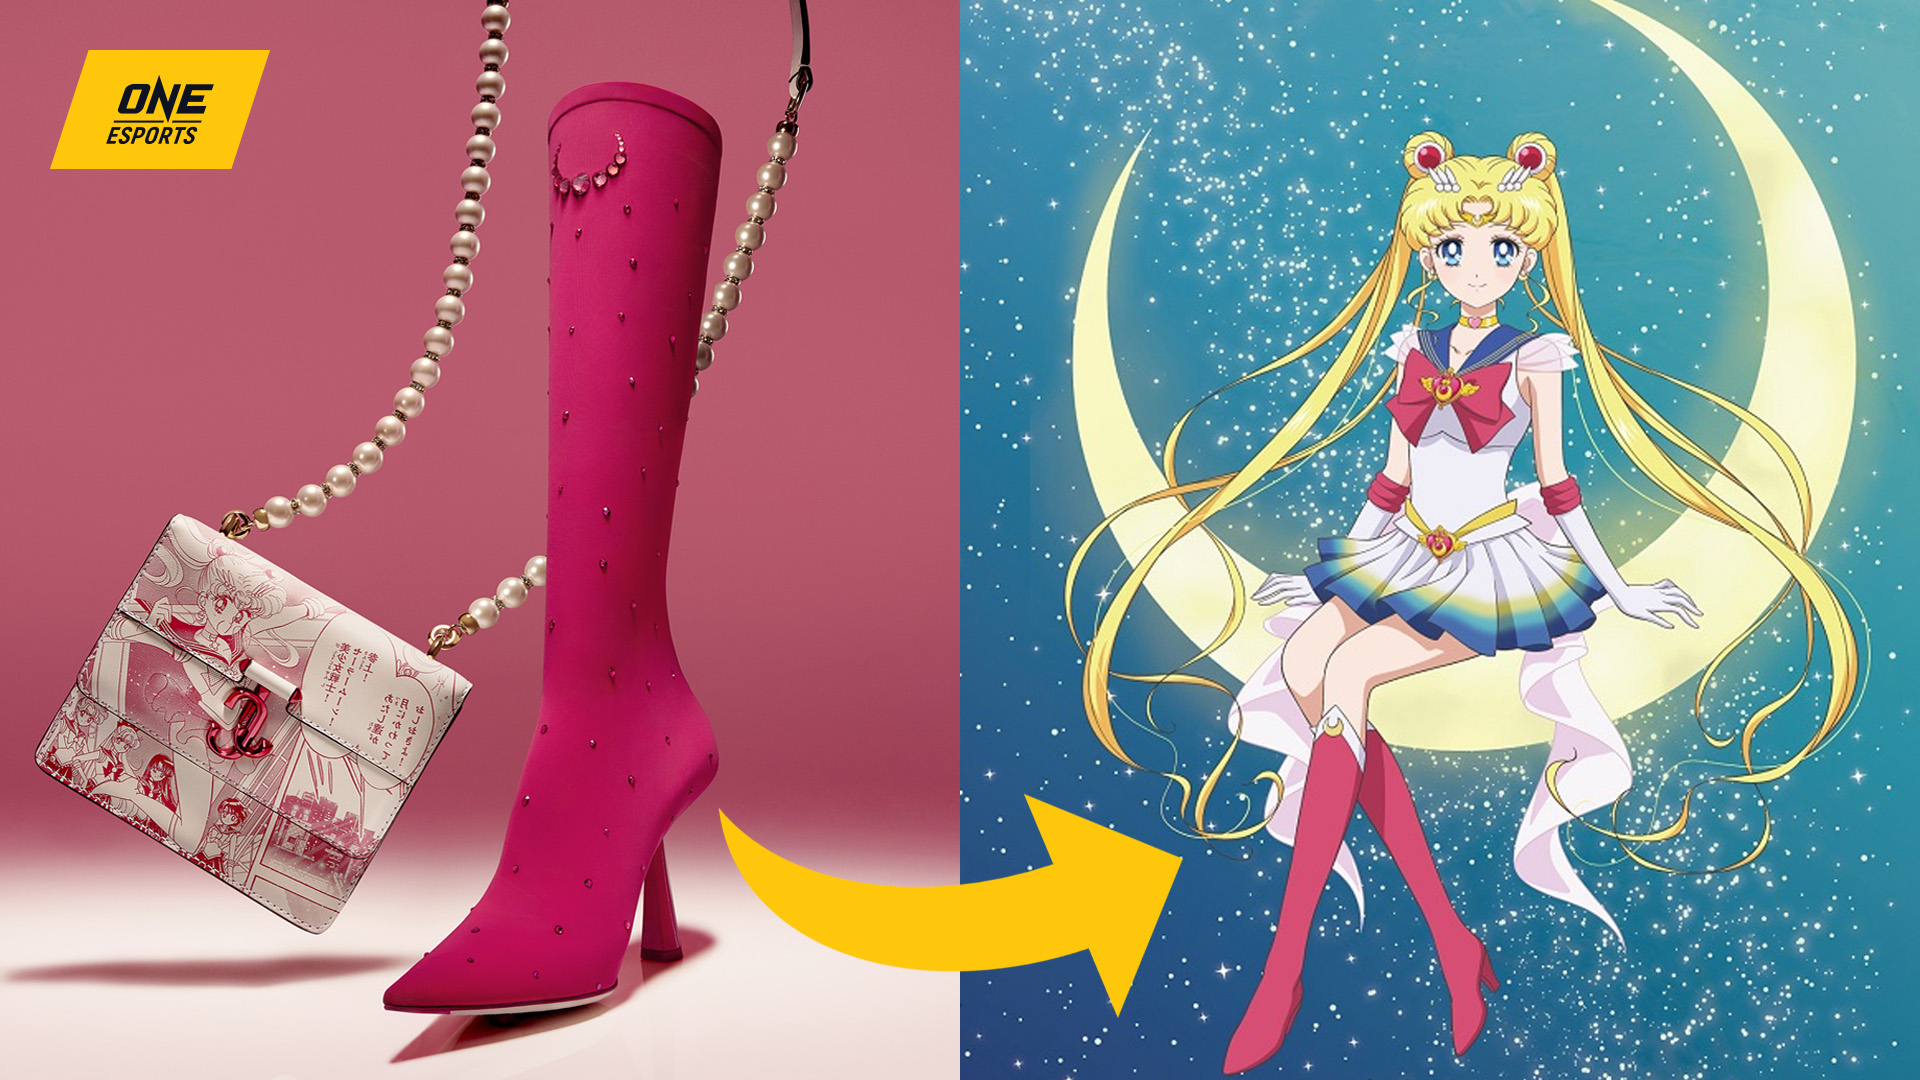 In the Name of Jimmy Choo & Sailor Moon!